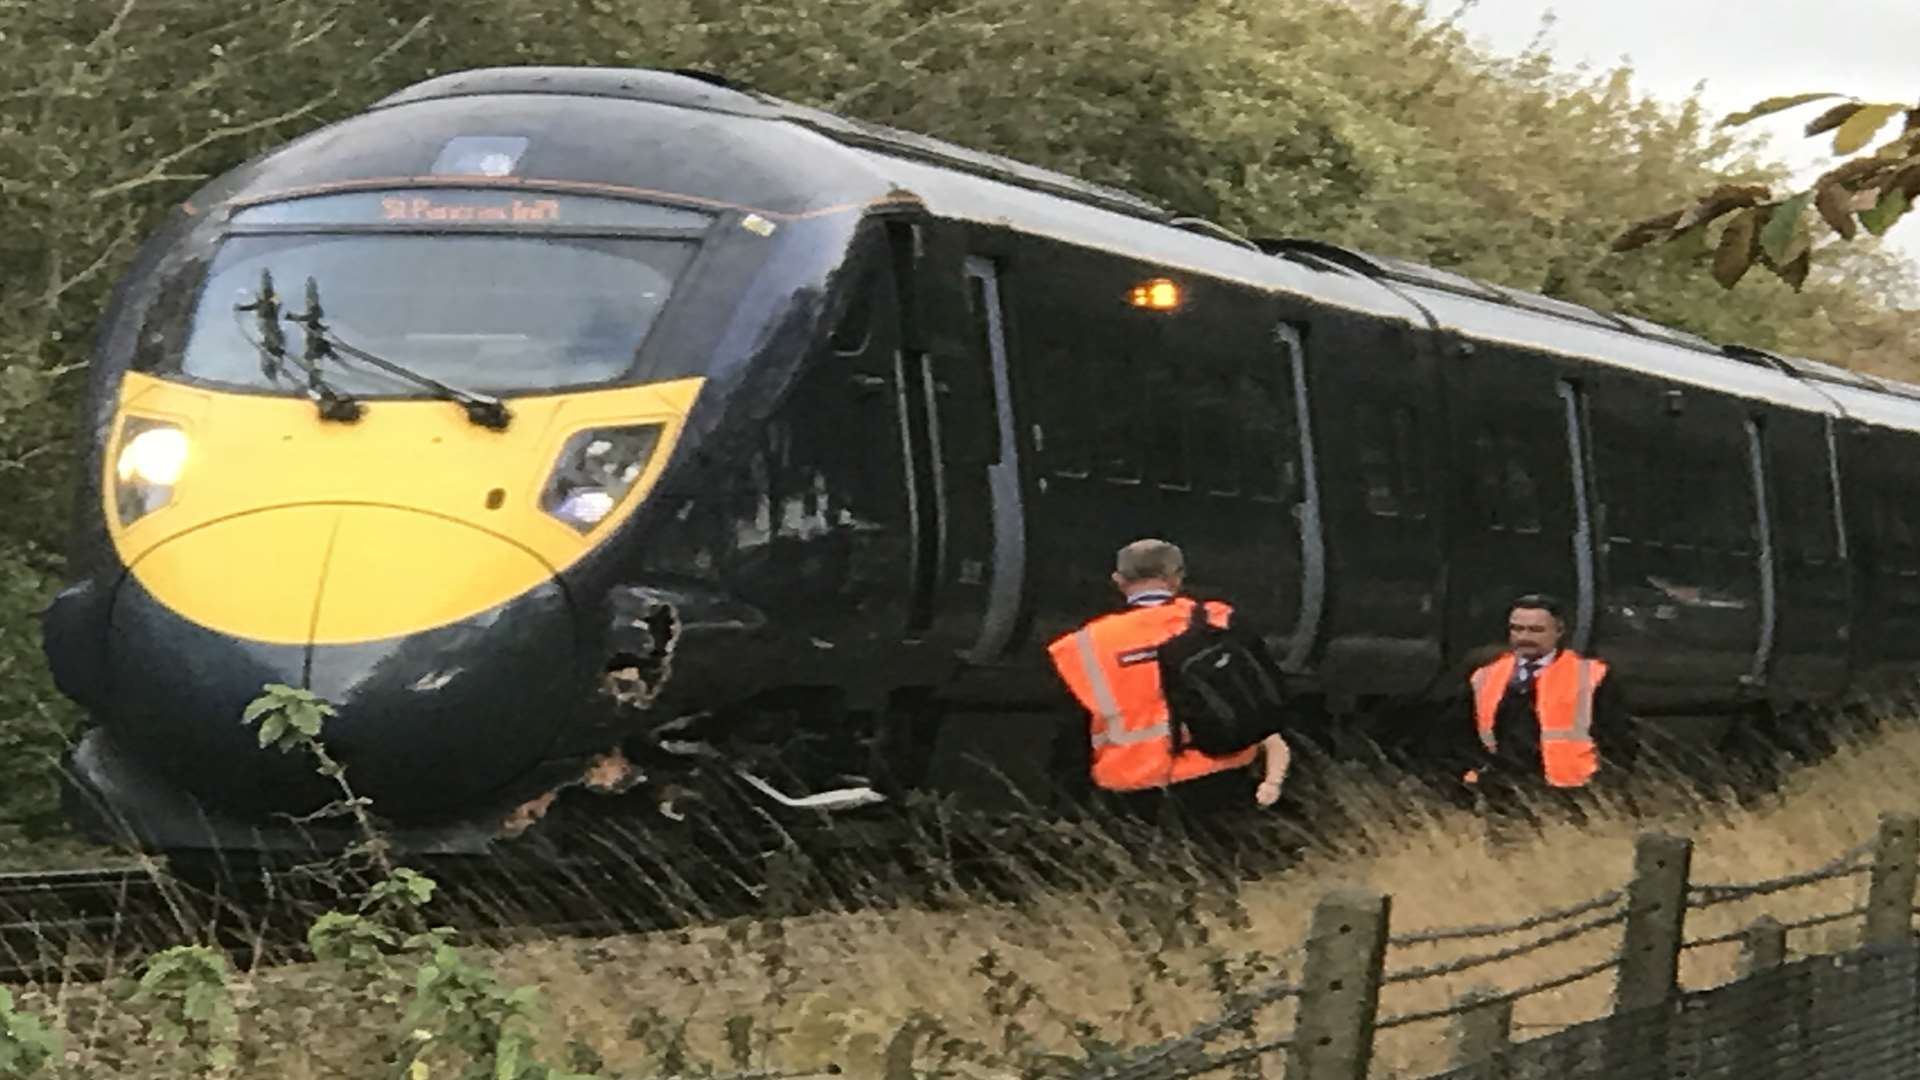 The front of the train was damaged in a collision with the train